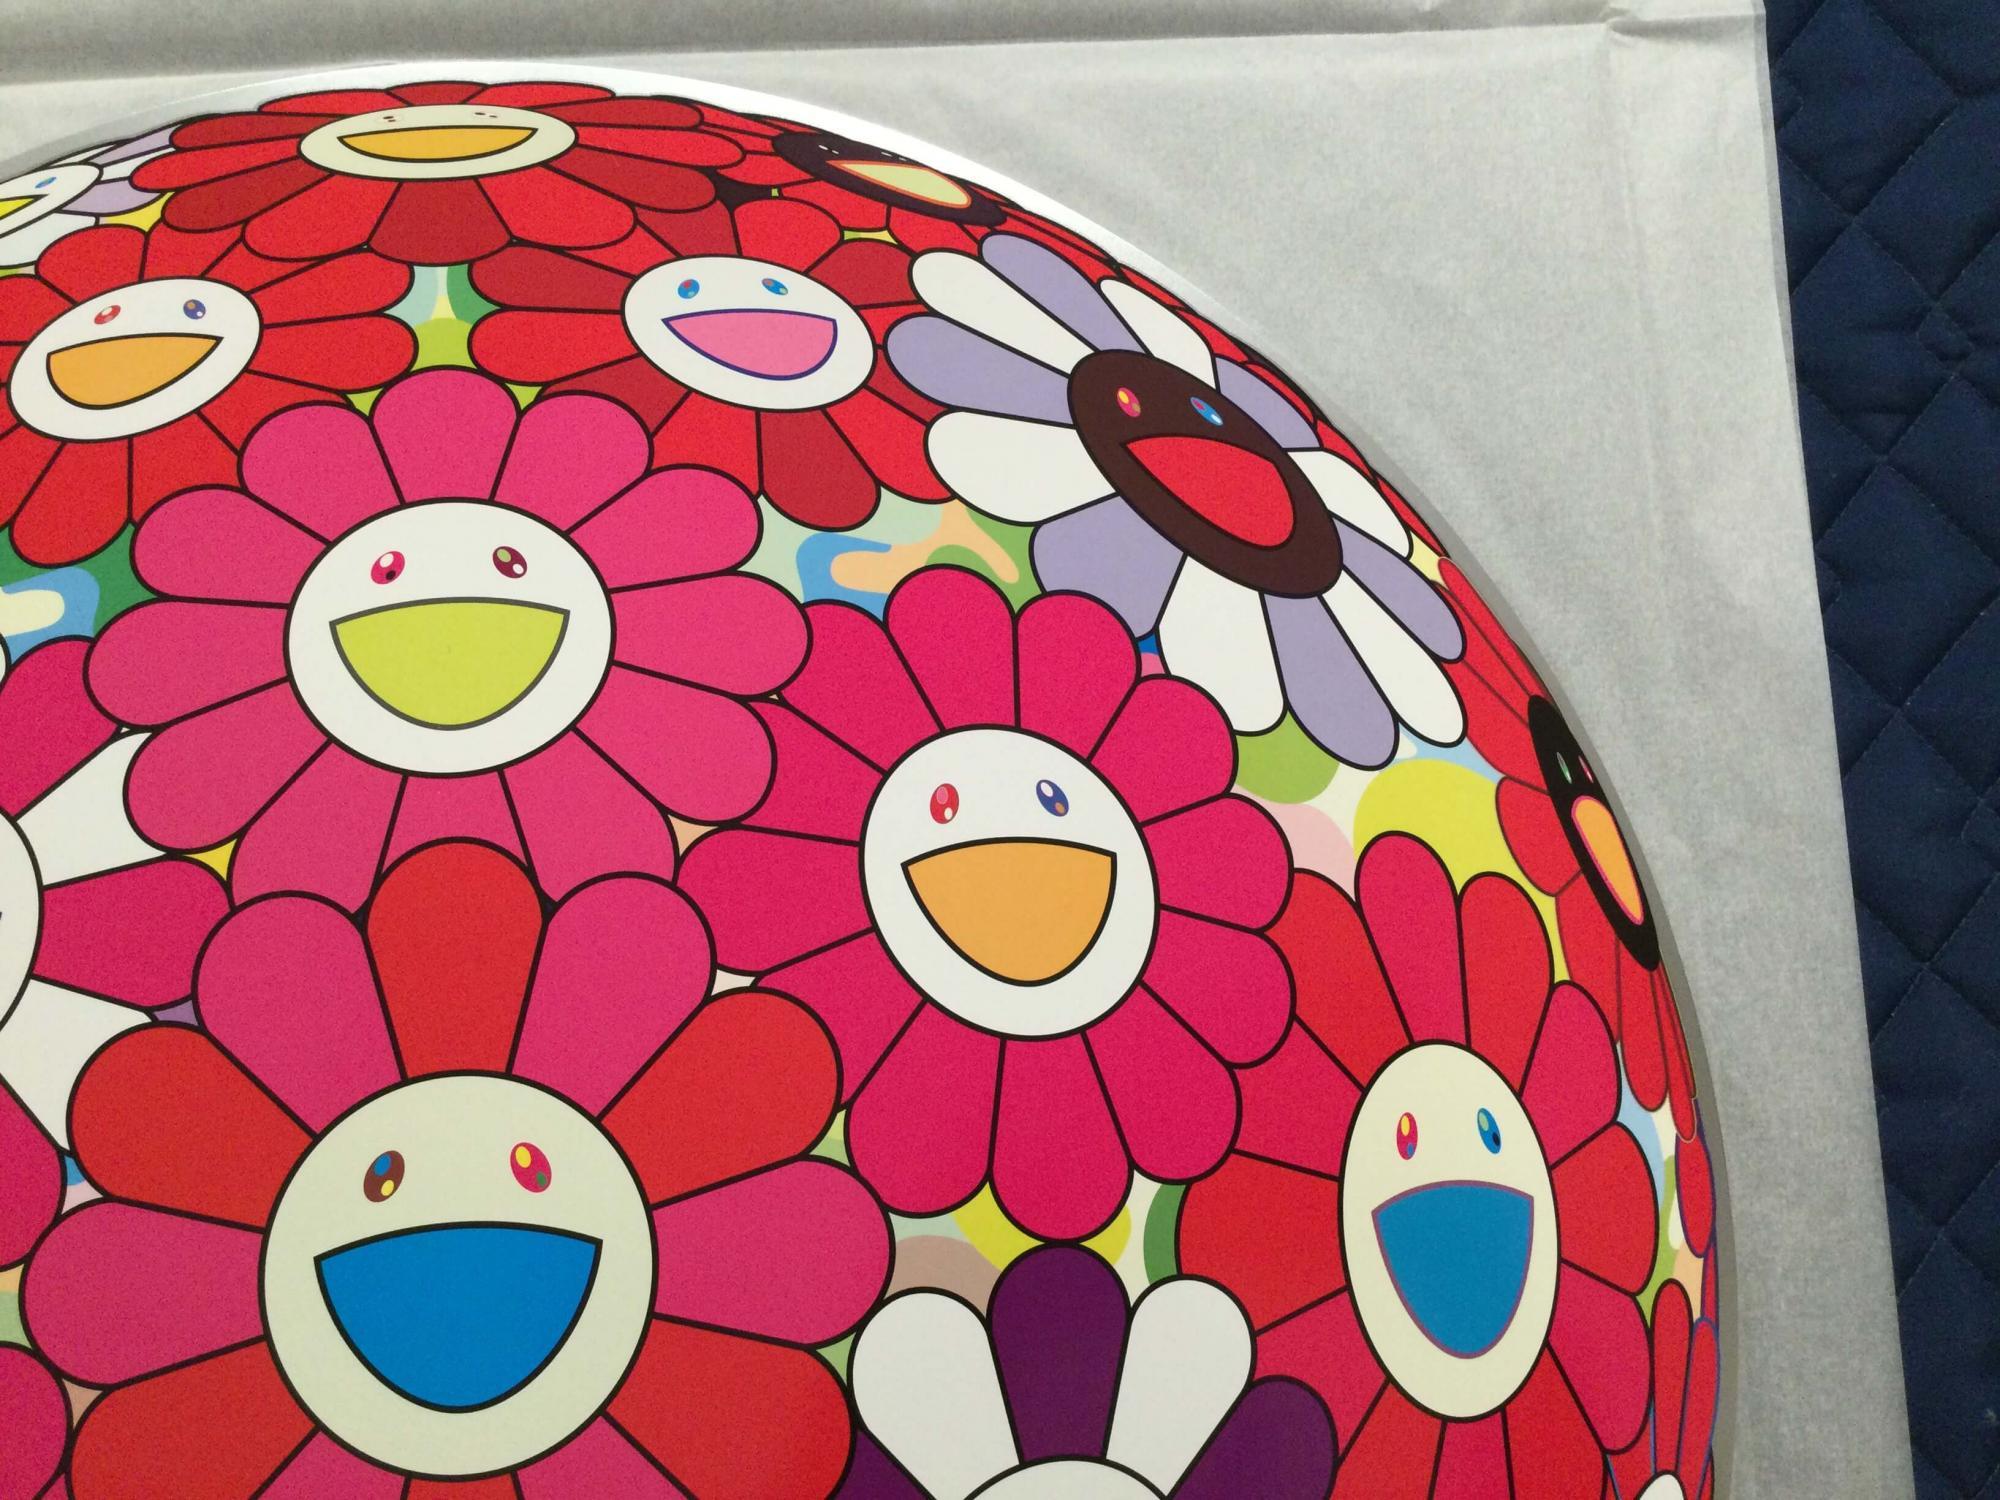 Flowerball (3D) - Turn Red! Limited Edition (print) Murakami signed and numbered - Pop Art Print by Takashi Murakami